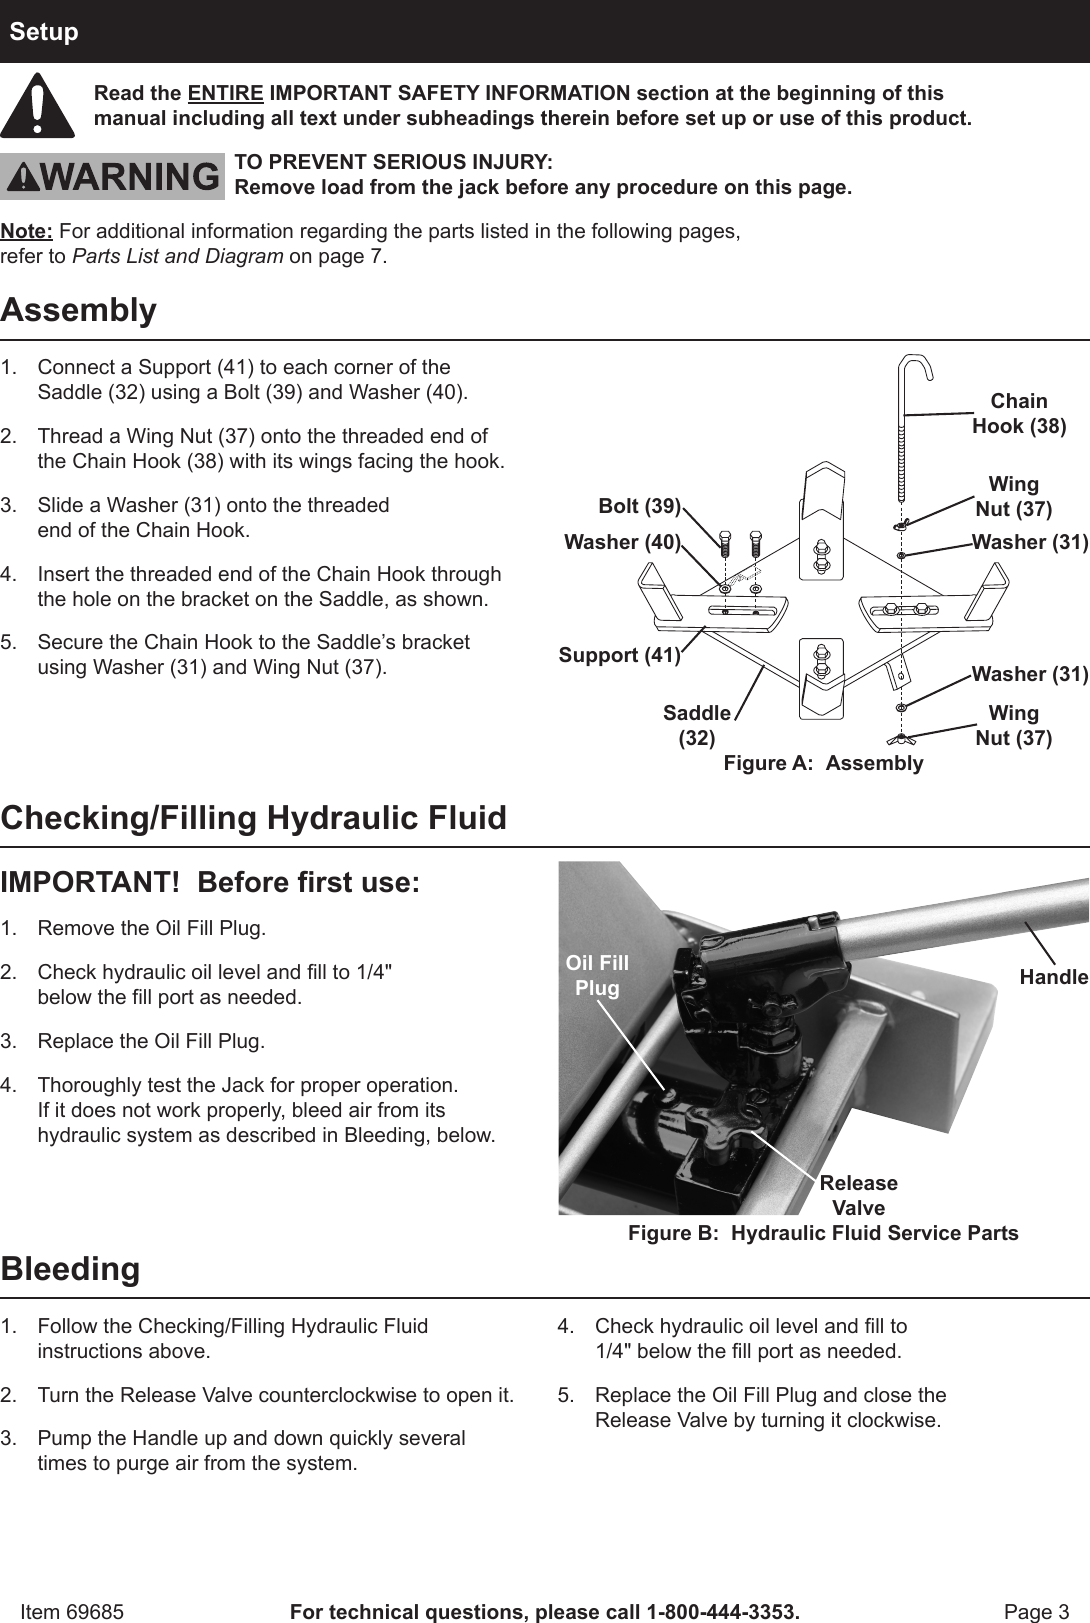 Harbor Freight 800 Lb Low Lift Transmission Jack Product Manual